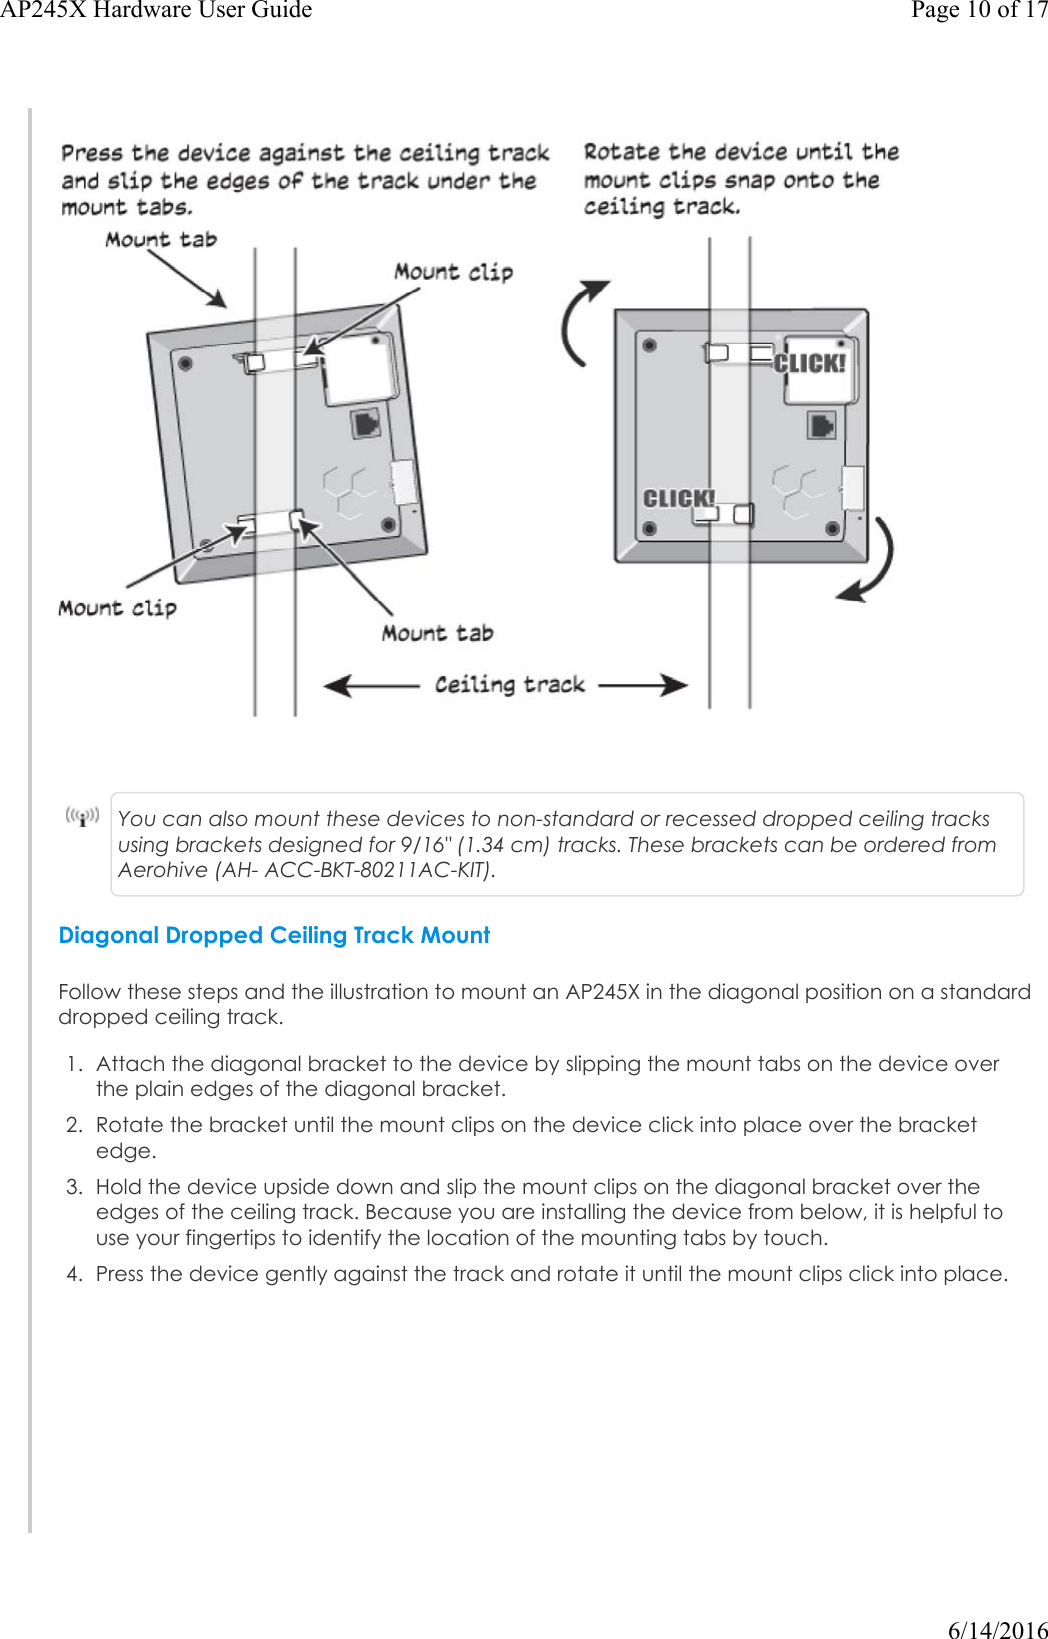 You can also mount these devices to non-standard or recessed dropped ceiling tracks using brackets designed for 9/16&quot; (1.34 cm) tracks. These brackets can be ordered from Aerohive (AH- ACC-BKT-80211AC-KIT).Diagonal Dropped Ceiling Track MountFollow these steps and the illustration to mount an AP245X in the diagonal position on a standard dropped ceiling track.1. Attach the diagonal bracket to the device by slipping the mount tabs on the device overthe plain edges of the diagonal bracket.2. Rotate the bracket until the mount clips on the device click into place over the bracketedge.3. Hold the device upside down and slip the mount clips on the diagonal bracket over theedges of the ceiling track. Because you are installing the device from below, it is helpful touse your fingertips to identify the location of the mounting tabs by touch.4. Press the device gently against the track and rotate it until the mount clips click into place.Page 10 of 17AP245X Hardware User Guide6/14/2016